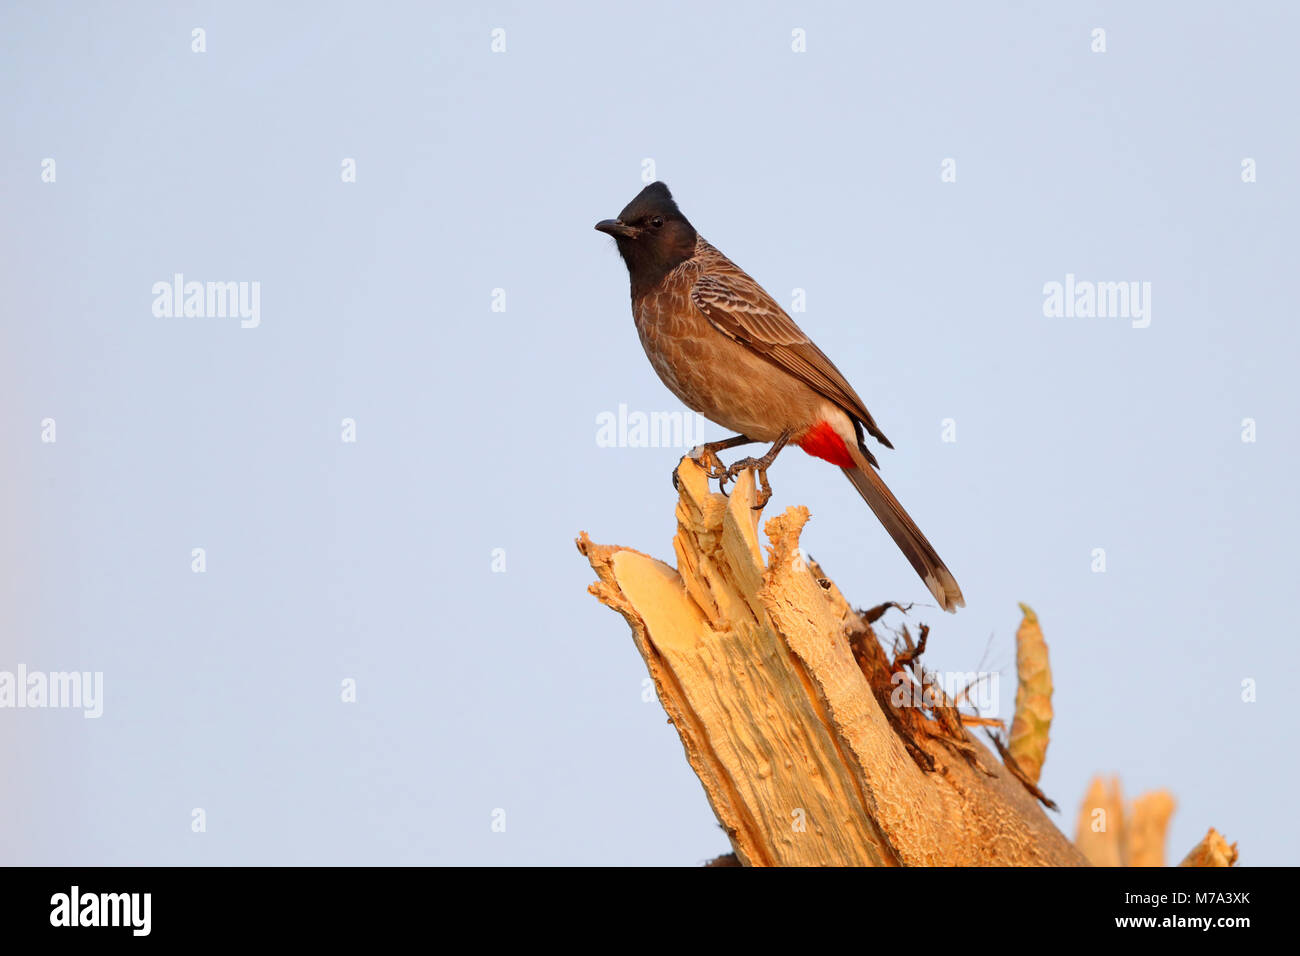 An adult Red-vented Bulbul (Pycnonotus cafer) in a tree in a garden in Nawalgarh, Rajasthan, India Stock Photo